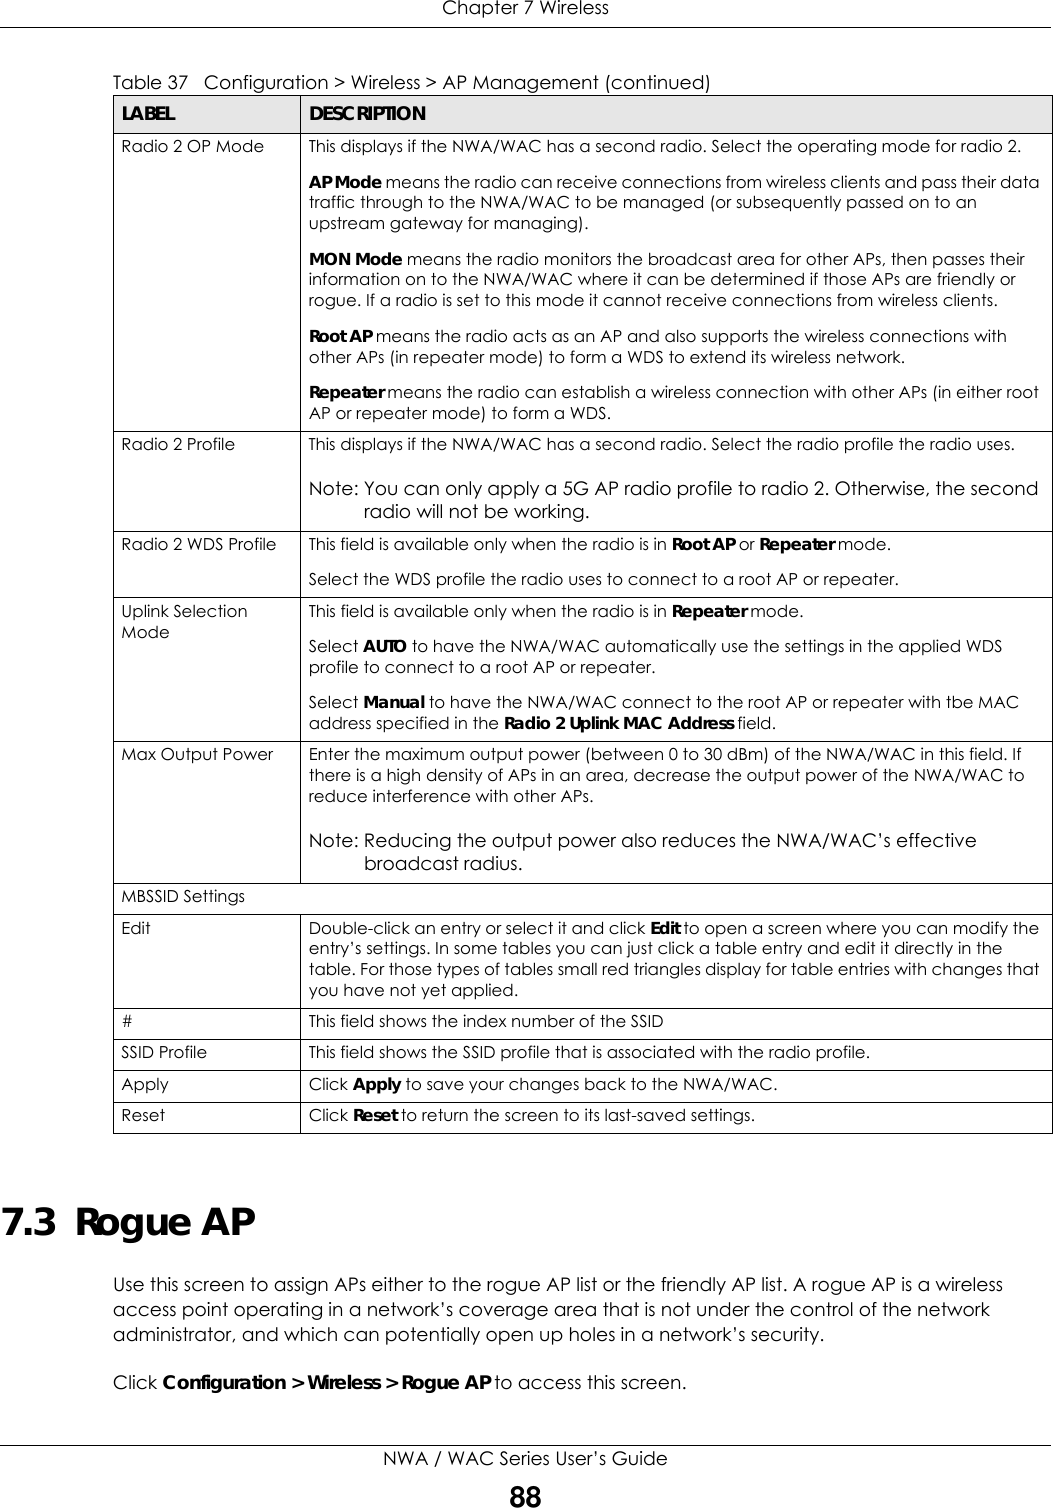 Chapter 7 WirelessNWA / WAC Series User’s Guide887.3  Rogue APUse this screen to assign APs either to the rogue AP list or the friendly AP list. A rogue AP is a wireless access point operating in a network’s coverage area that is not under the control of the network administrator, and which can potentially open up holes in a network’s security.Click Configuration &gt; Wireless &gt; Rogue AP to access this screen.Radio 2 OP Mode This displays if the NWA/WAC has a second radio. Select the operating mode for radio 2.AP Mode means the radio can receive connections from wireless clients and pass their data traffic through to the NWA/WAC to be managed (or subsequently passed on to an upstream gateway for managing).MON Mode means the radio monitors the broadcast area for other APs, then passes their information on to the NWA/WAC where it can be determined if those APs are friendly or rogue. If a radio is set to this mode it cannot receive connections from wireless clients.Root AP means the radio acts as an AP and also supports the wireless connections with other APs (in repeater mode) to form a WDS to extend its wireless network.Repeater means the radio can establish a wireless connection with other APs (in either root AP or repeater mode) to form a WDS.Radio 2 Profile This displays if the NWA/WAC has a second radio. Select the radio profile the radio uses. Note: You can only apply a 5G AP radio profile to radio 2. Otherwise, the second radio will not be working.Radio 2 WDS Profile This field is available only when the radio is in Root AP or Repeater mode.Select the WDS profile the radio uses to connect to a root AP or repeater.Uplink Selection ModeThis field is available only when the radio is in Repeater mode.Select AUTO to have the NWA/WAC automatically use the settings in the applied WDS profile to connect to a root AP or repeater.Select Manual to have the NWA/WAC connect to the root AP or repeater with tbe MAC address specified in the Radio 2 Uplink MAC Address field.Max Output Power Enter the maximum output power (between 0 to 30 dBm) of the NWA/WAC in this field. If there is a high density of APs in an area, decrease the output power of the NWA/WAC to reduce interference with other APs.Note: Reducing the output power also reduces the NWA/WAC’s effective broadcast radius.MBSSID SettingsEdit Double-click an entry or select it and click Edit to open a screen where you can modify the entry’s settings. In some tables you can just click a table entry and edit it directly in the table. For those types of tables small red triangles display for table entries with changes that you have not yet applied.# This field shows the index number of the SSIDSSID Profile This field shows the SSID profile that is associated with the radio profile.Apply Click Apply to save your changes back to the NWA/WAC.Reset Click Reset to return the screen to its last-saved settings.Table 37   Configuration &gt; Wireless &gt; AP Management (continued)LABEL  DESCRIPTION